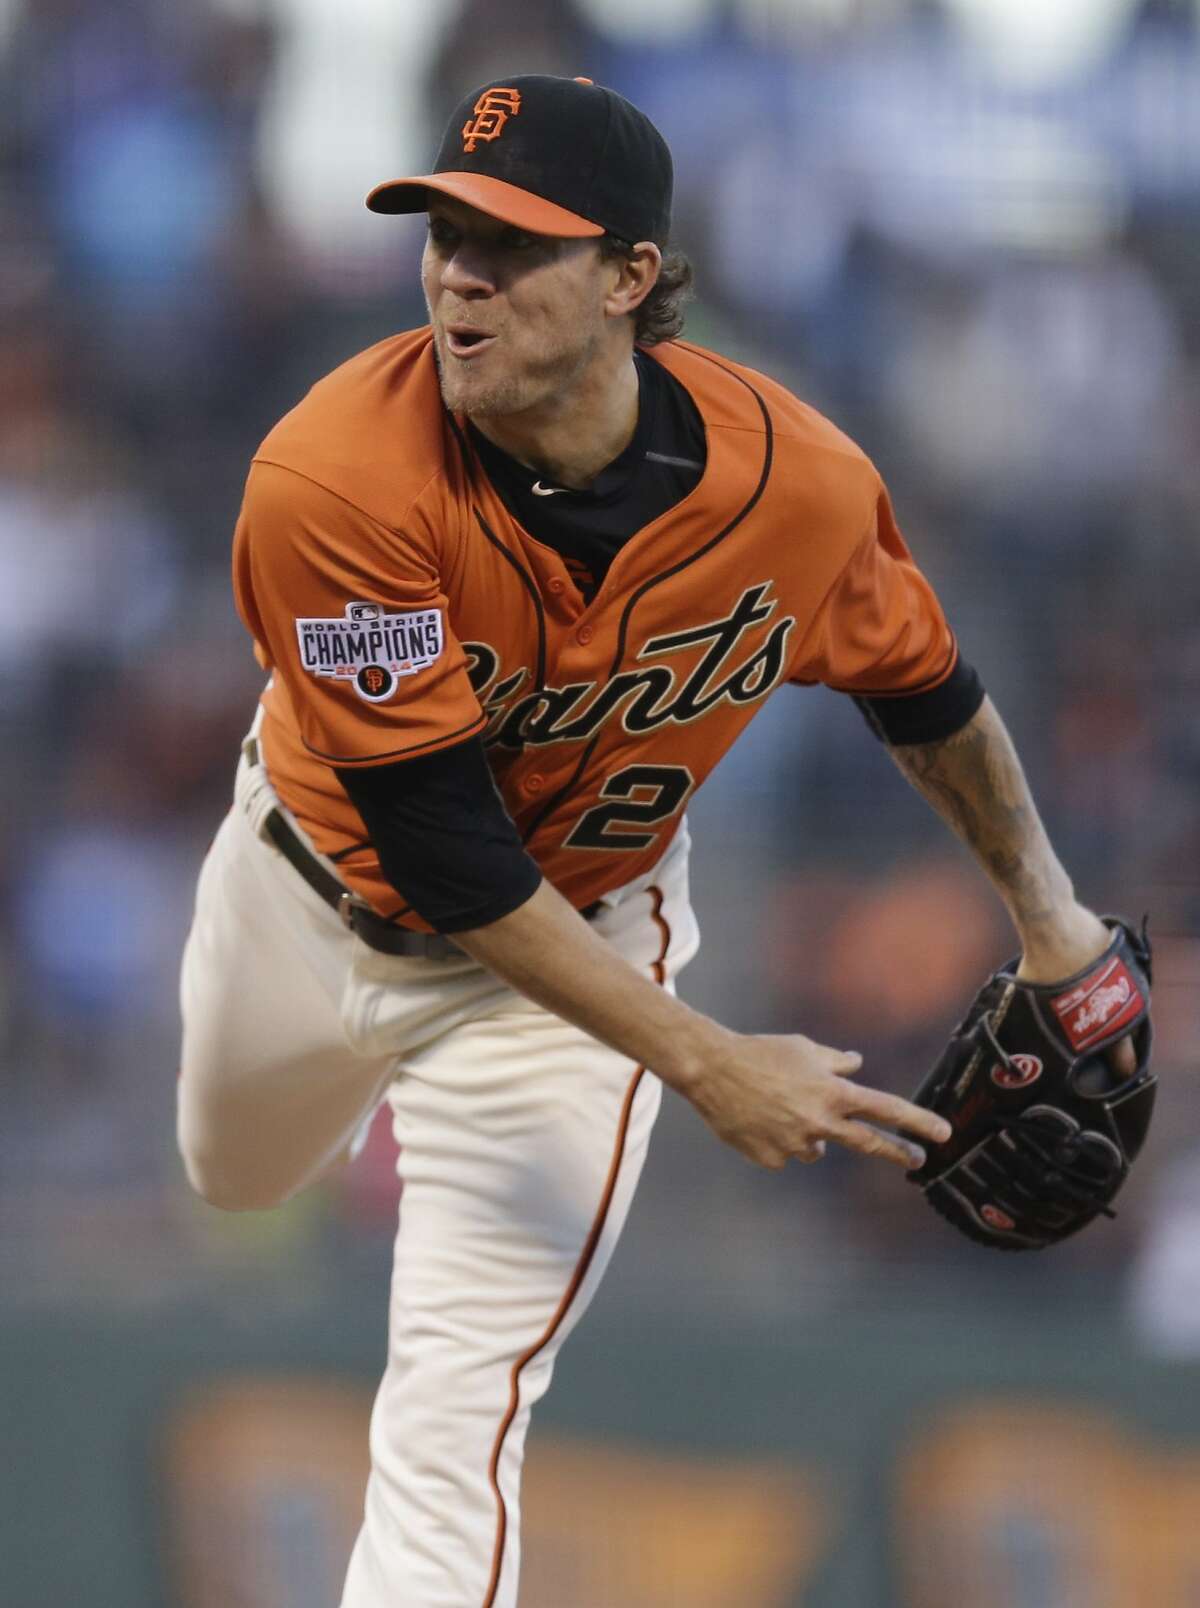 San Francisco Giants' Jake Peavy works against the Arizona Diamondbacks in the first inning of a baseball game Friday, April 17, 2015, in San Francisco. (AP Photo/Ben Margot)